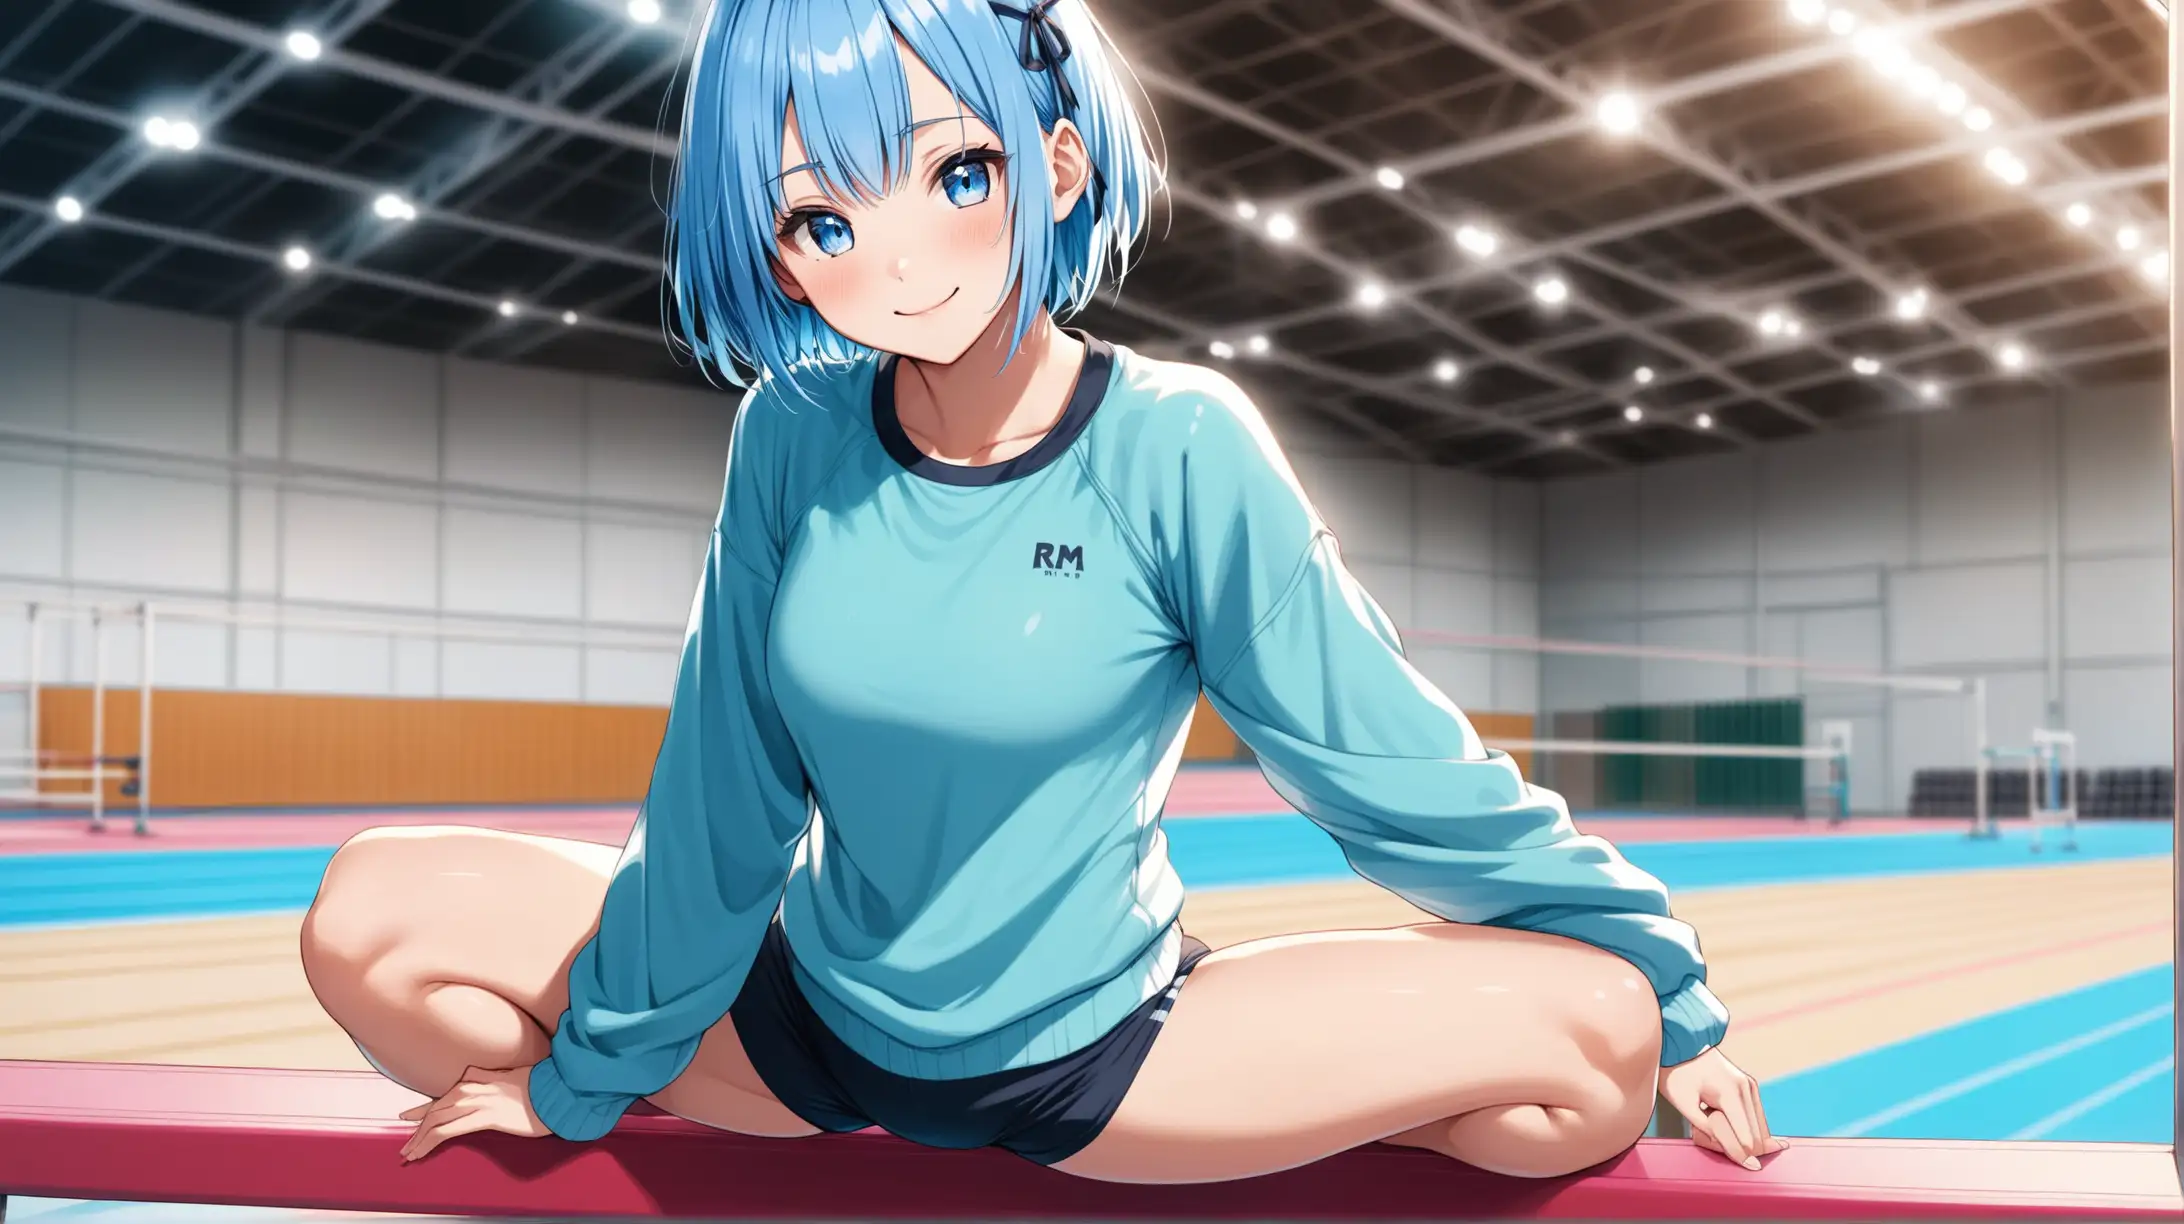 Smiling Rem in Gym Clothes Balancing on Gymnastics Beam